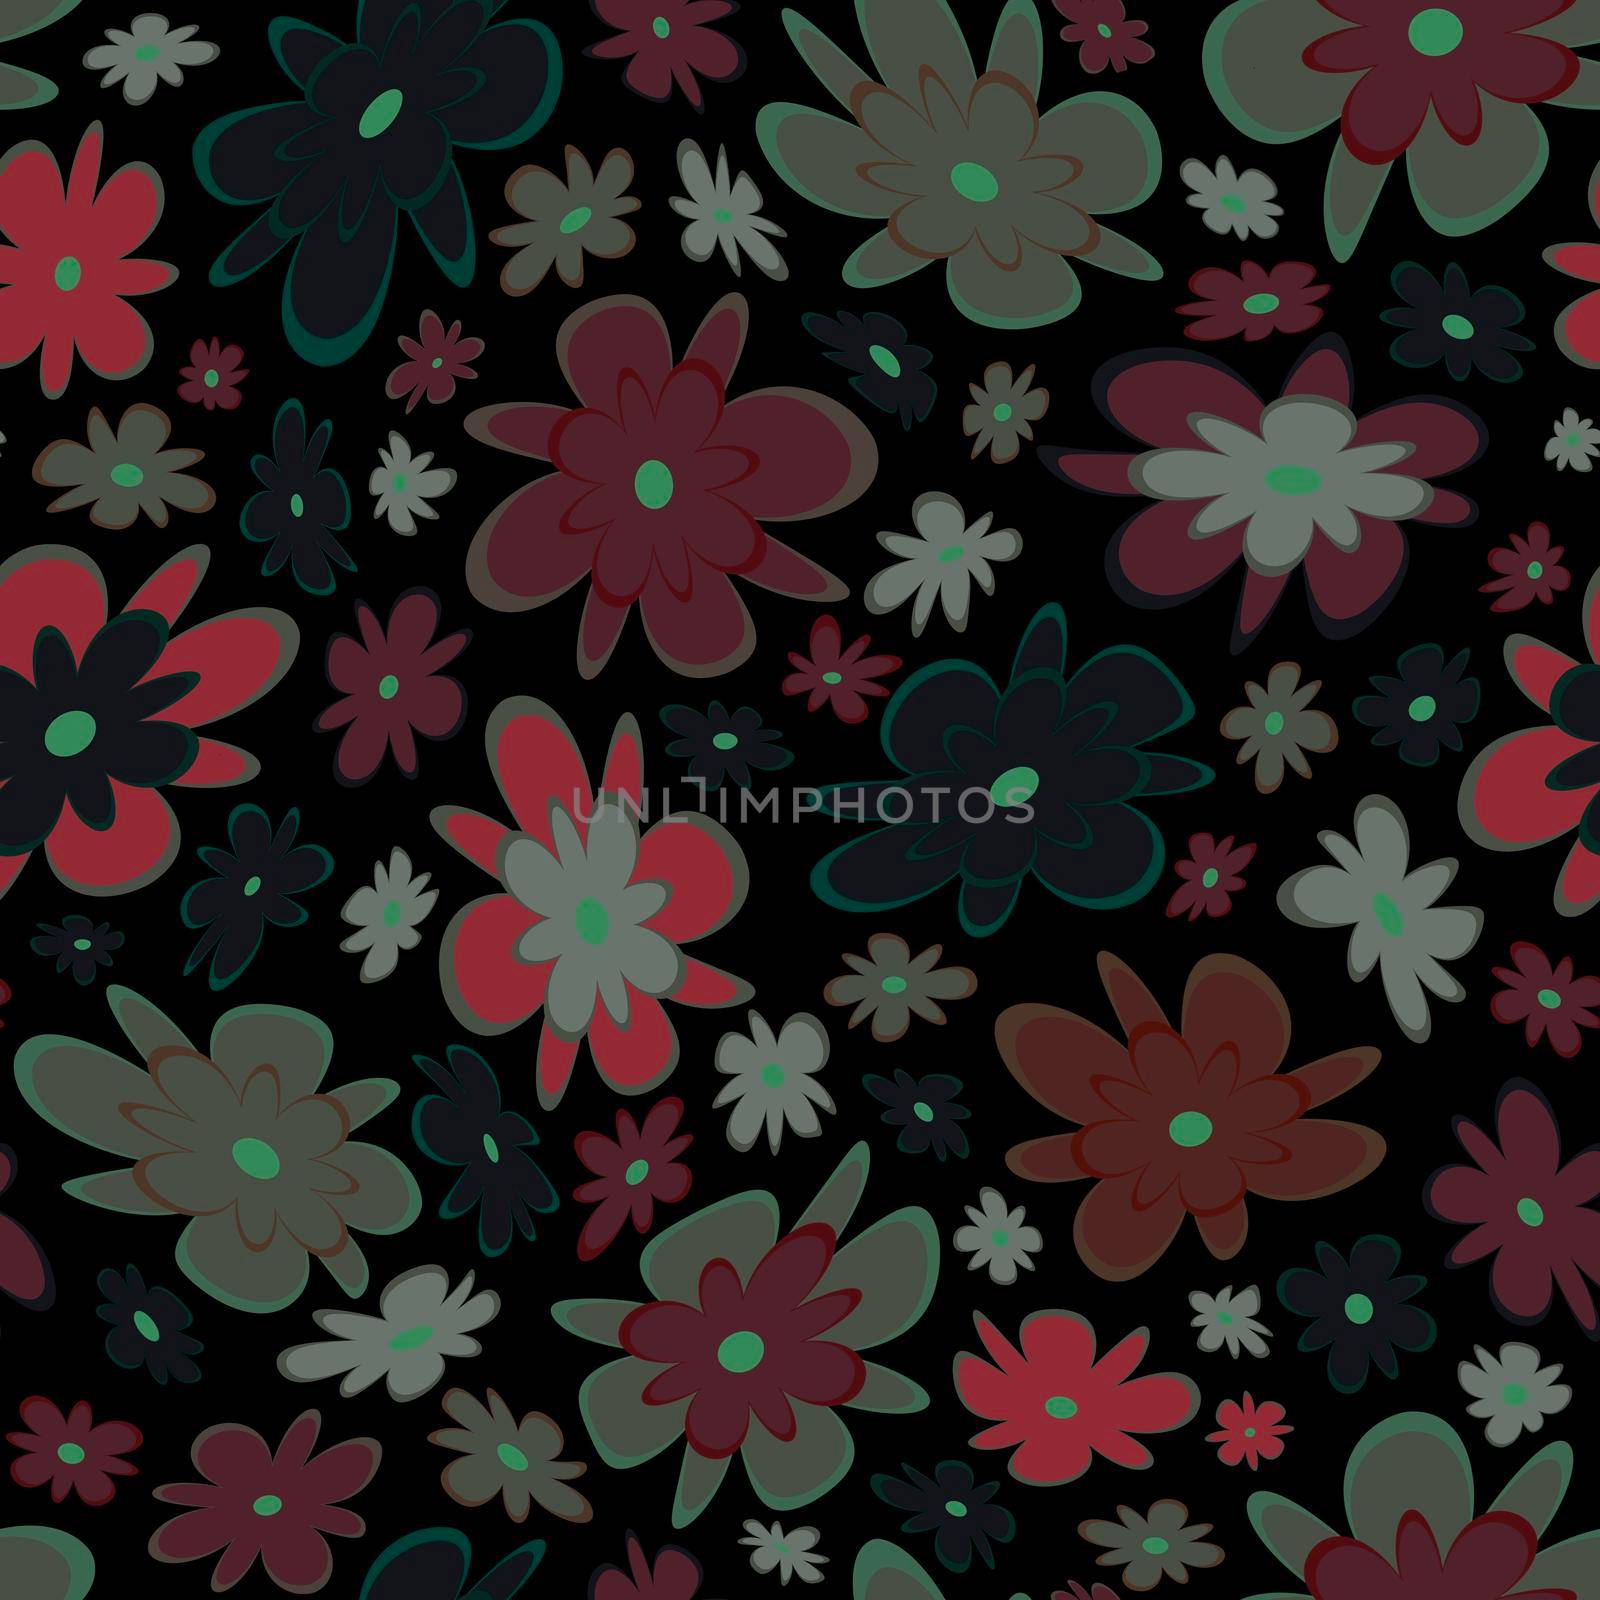 Trendy fabric pattern with miniature flowers.Summer print.Fashion design.Motifs scattered random.Elegant template for fashion prints.Good for fashion,textile,fabric,gift wrapping paper.Brown on black.